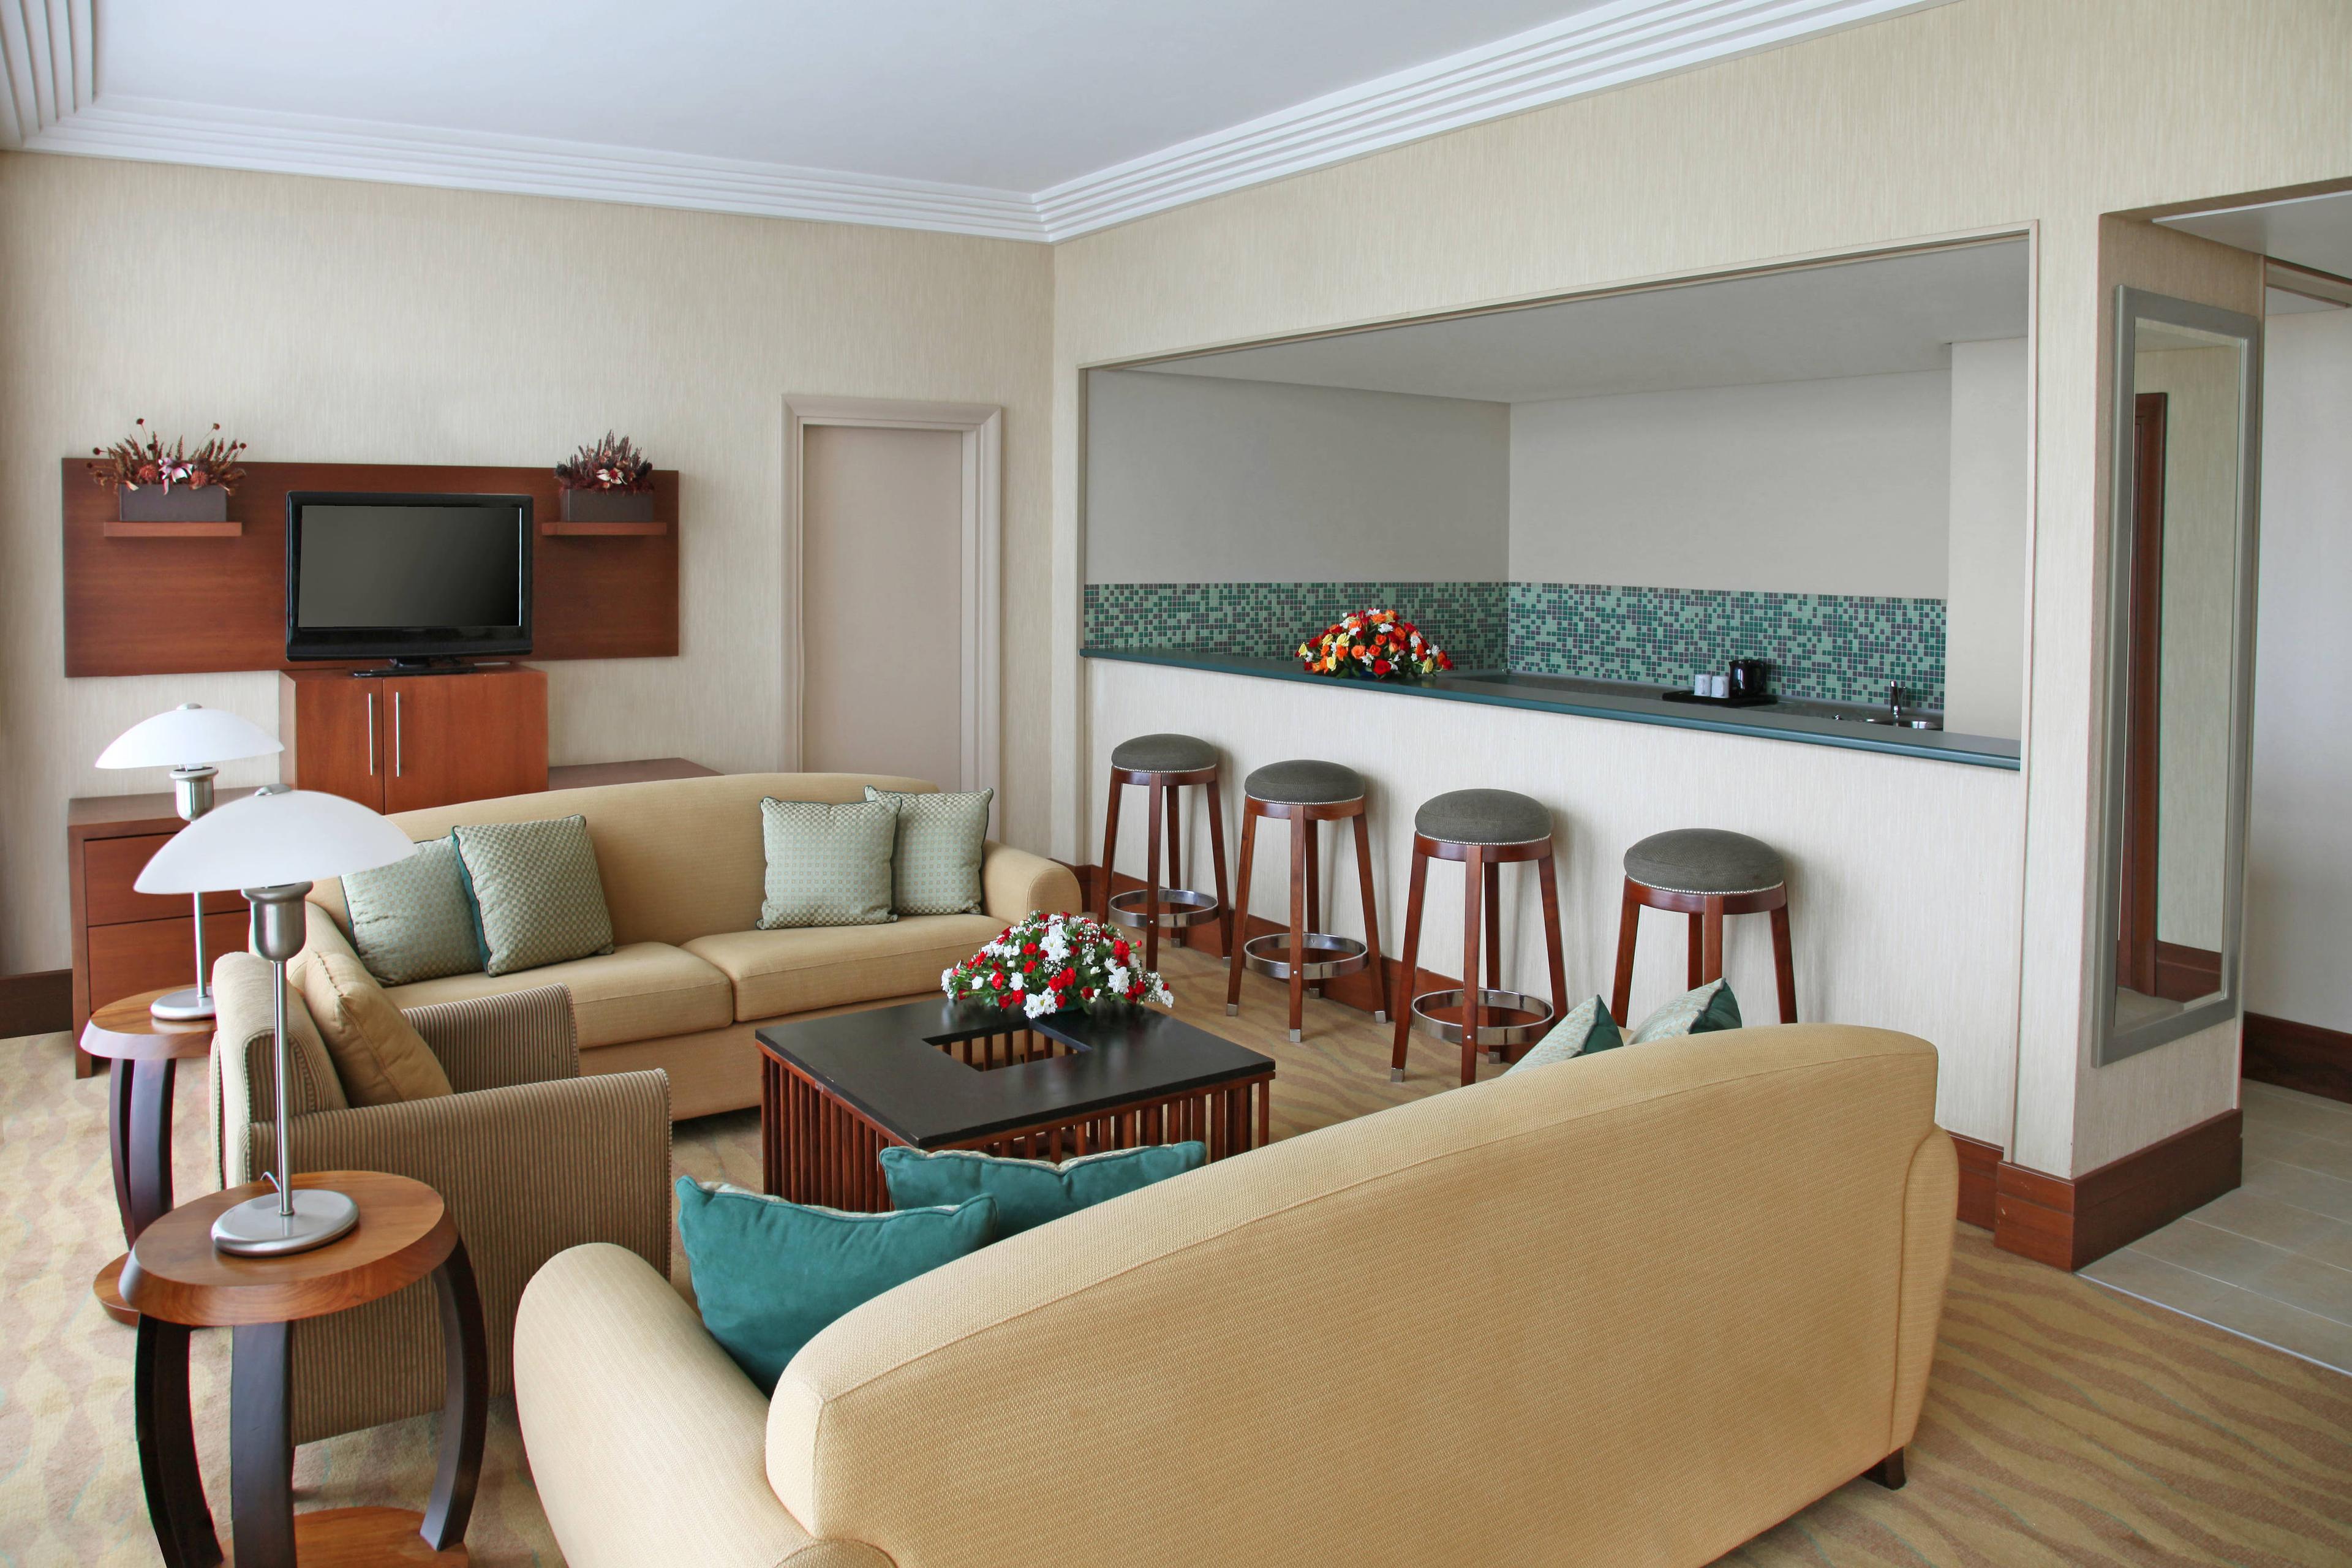 Our Junior Suite i provide special benefits that inlcudes Club Lounge access and complimenatary food as well as a separate living and dining area.